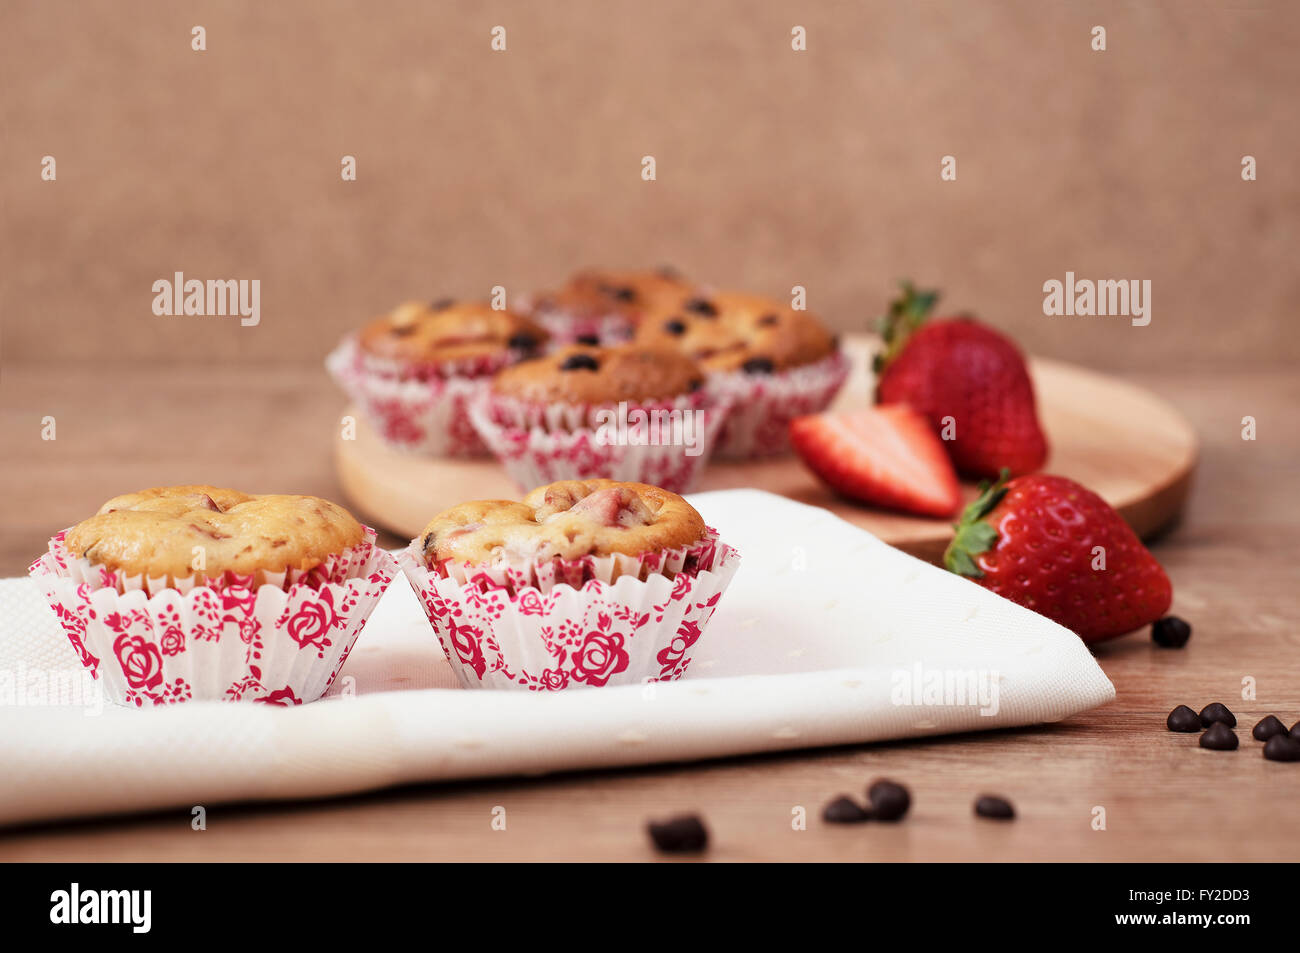 Strawberries and chocolate chip muffins on wooden background Stock Photo